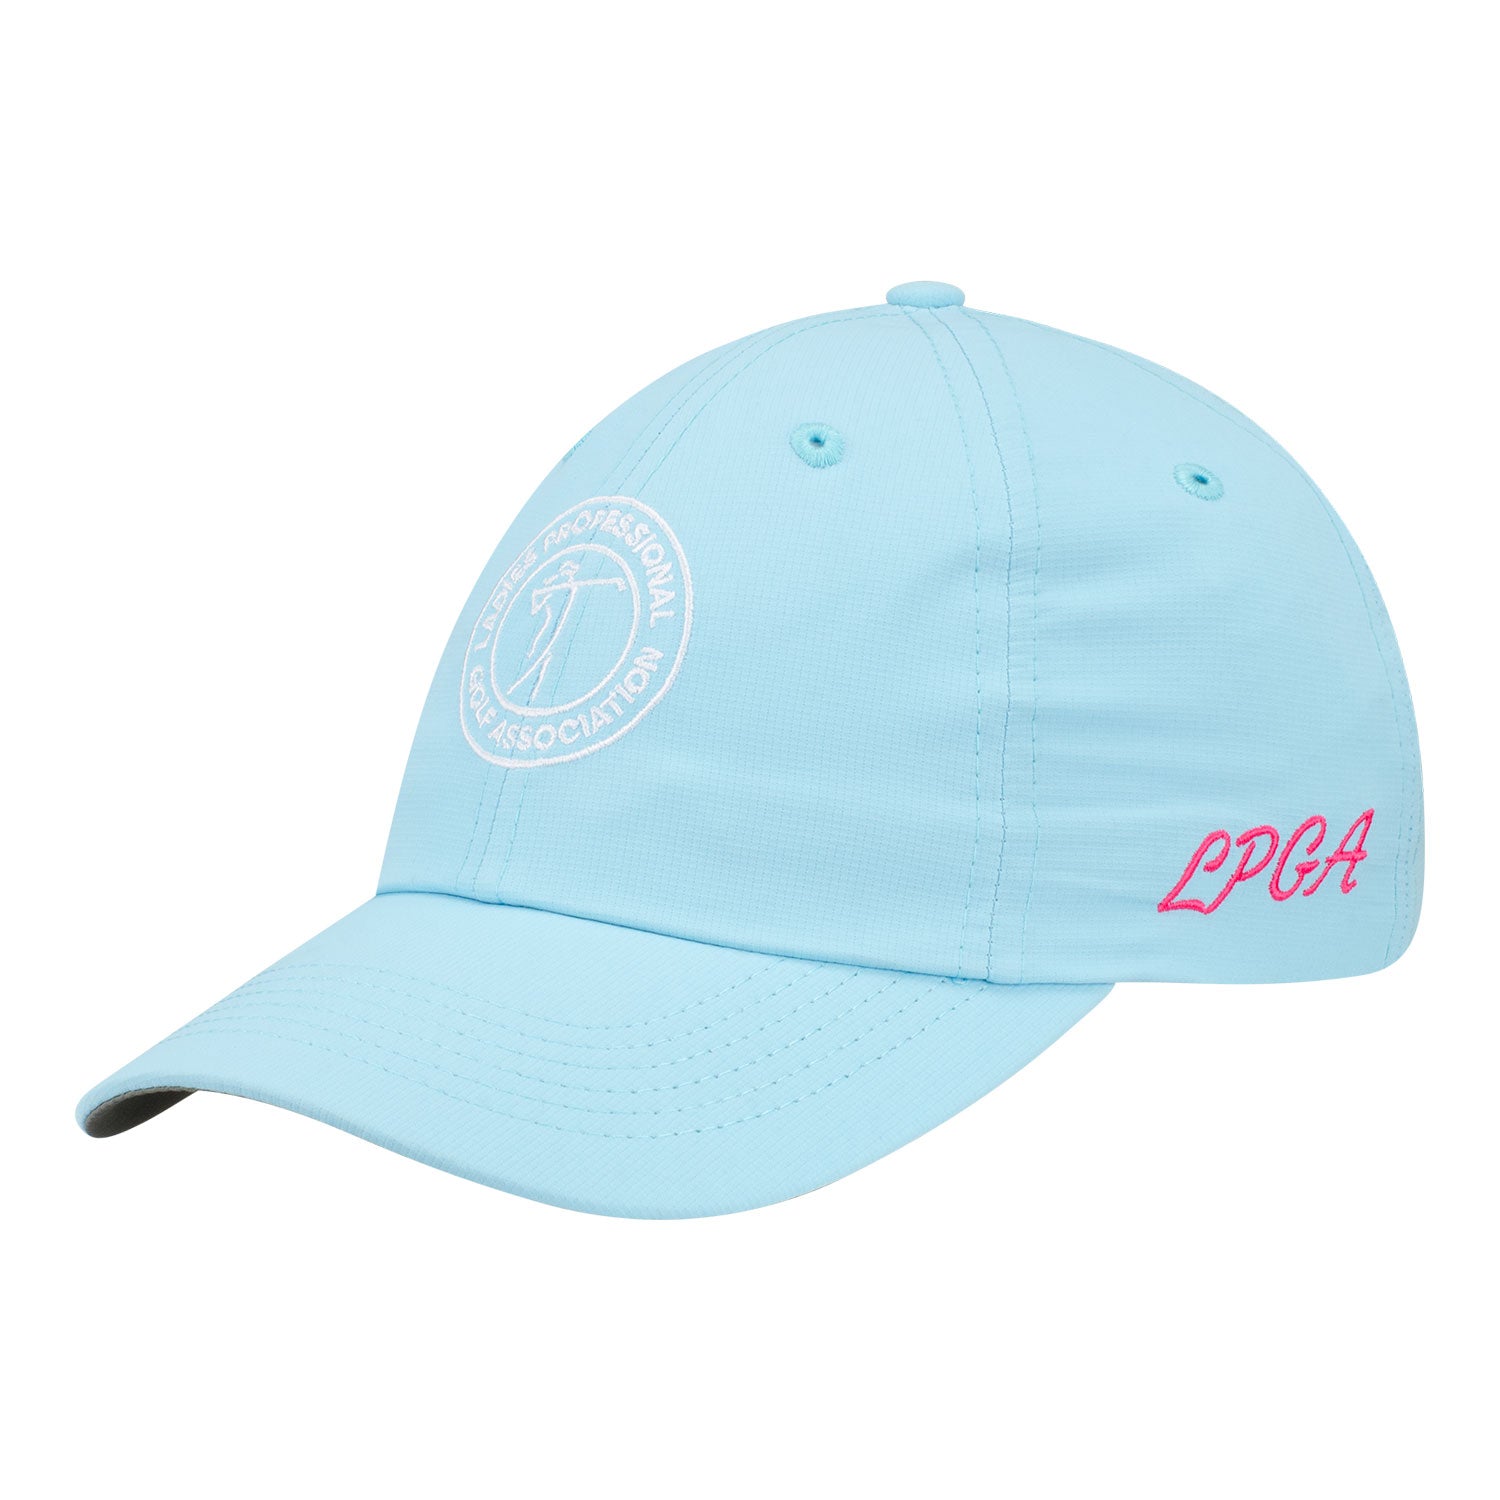 Imperial LPGA Women's Hat in Blue - Angled Left Side View